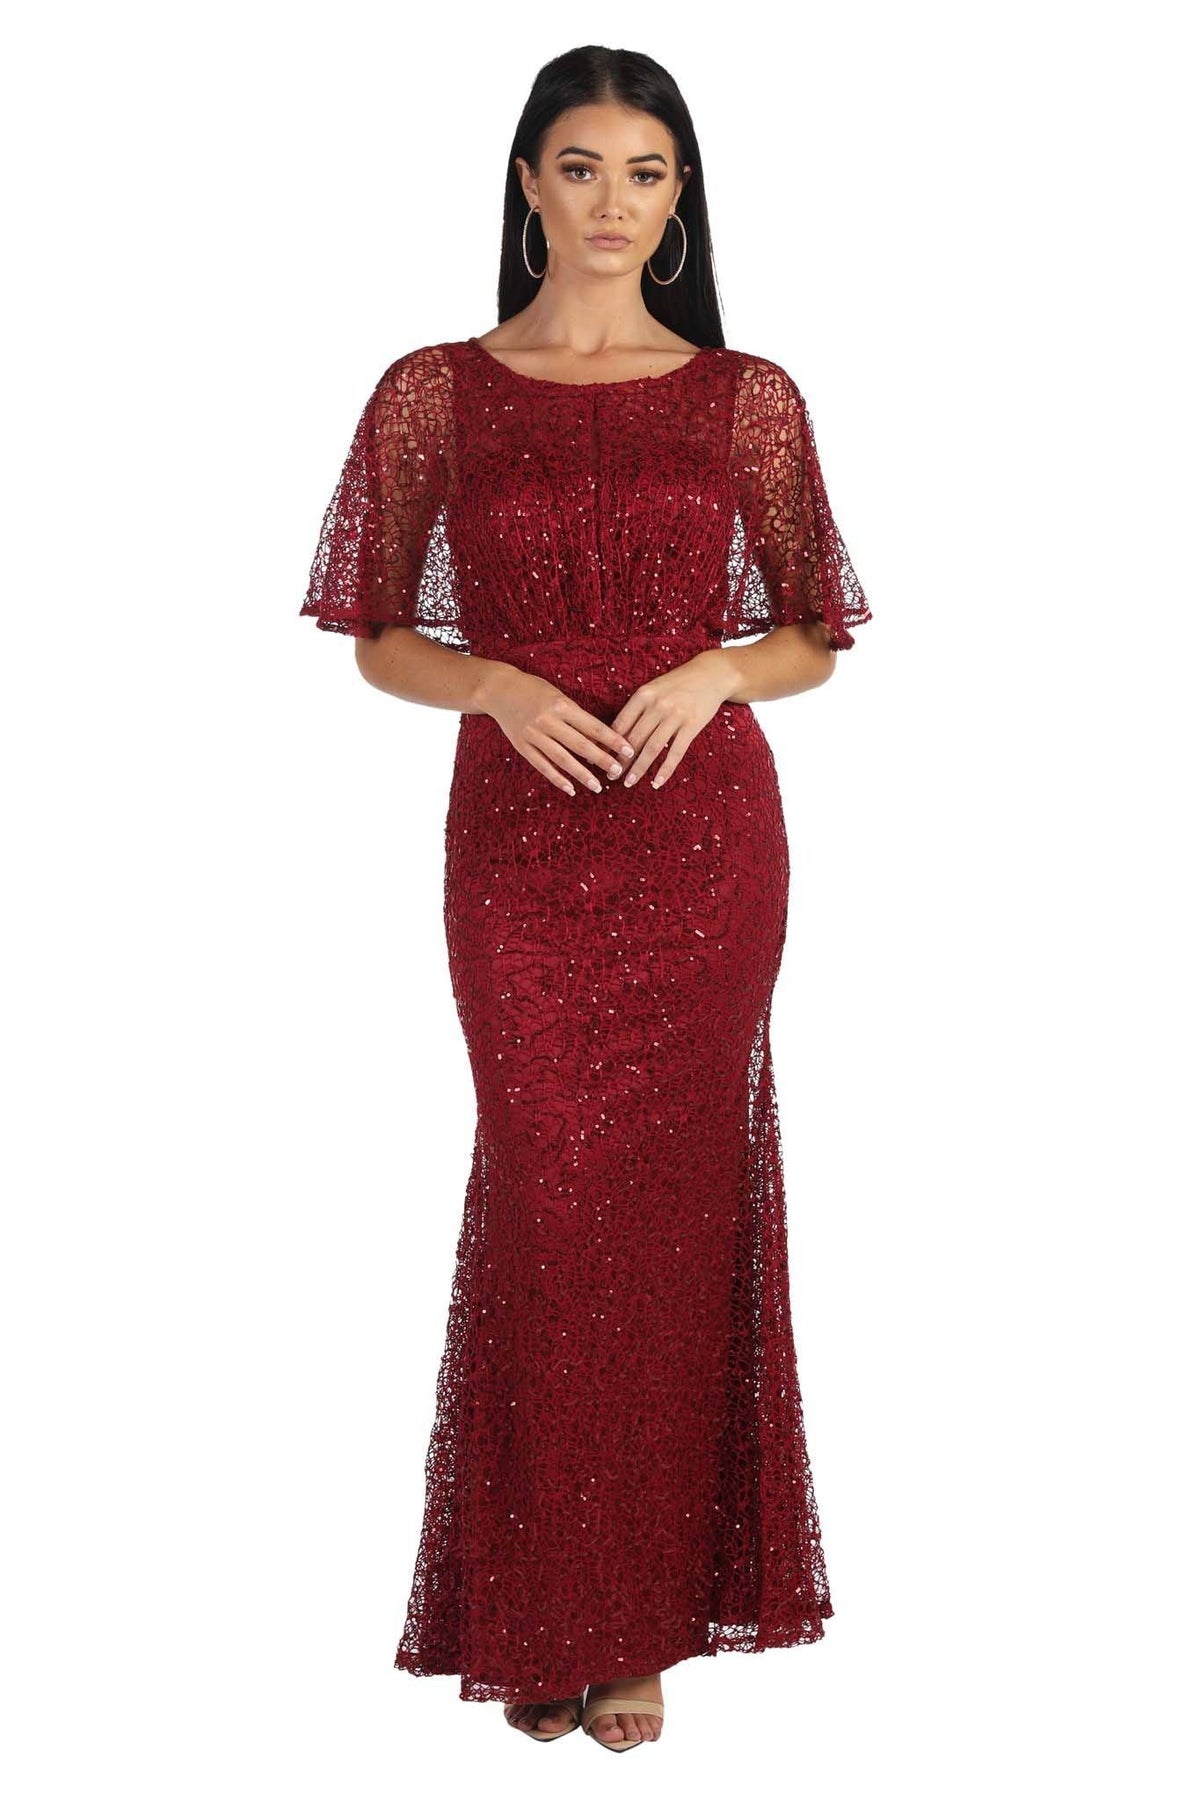 Deep Red sequin evening maxi dress with boat neckline and butterfly half sleeves